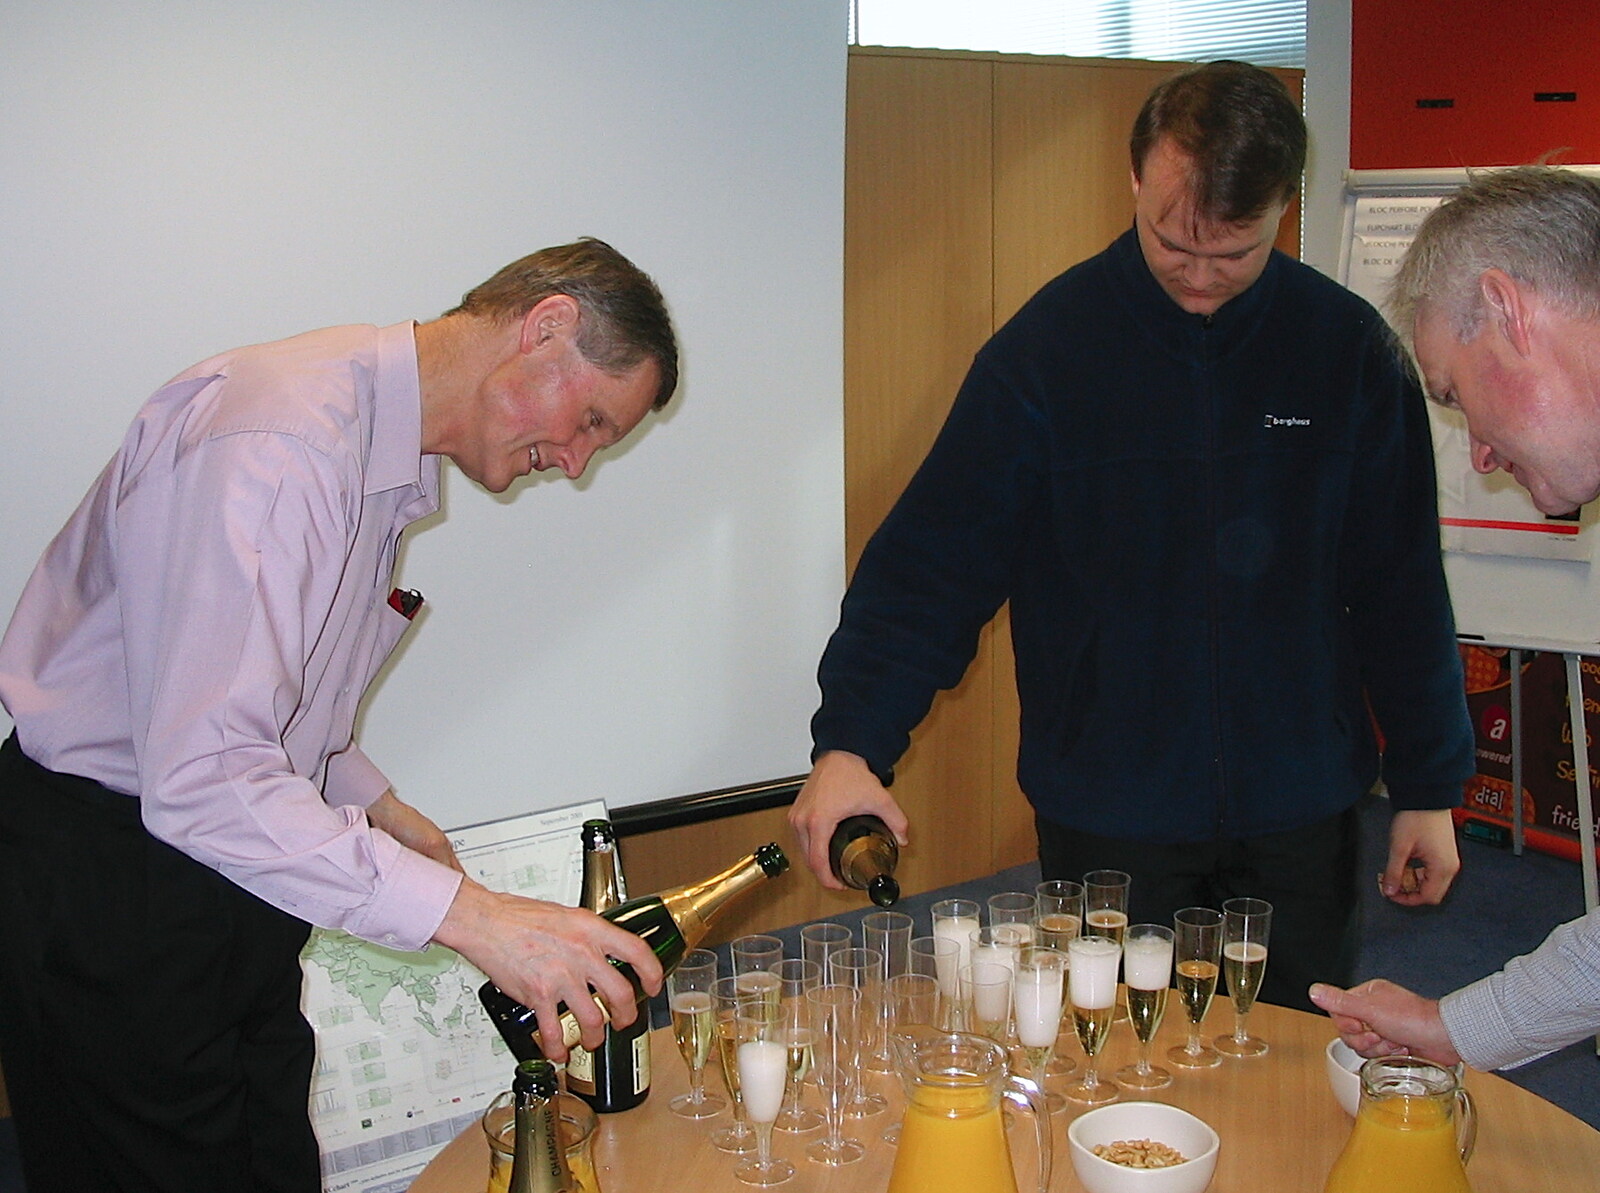 At the new Qualcomm Cambridge, Champagne is served from A Swan Car Crash and the End of Trigenix, Brome and Cambridge - 31st January 2005